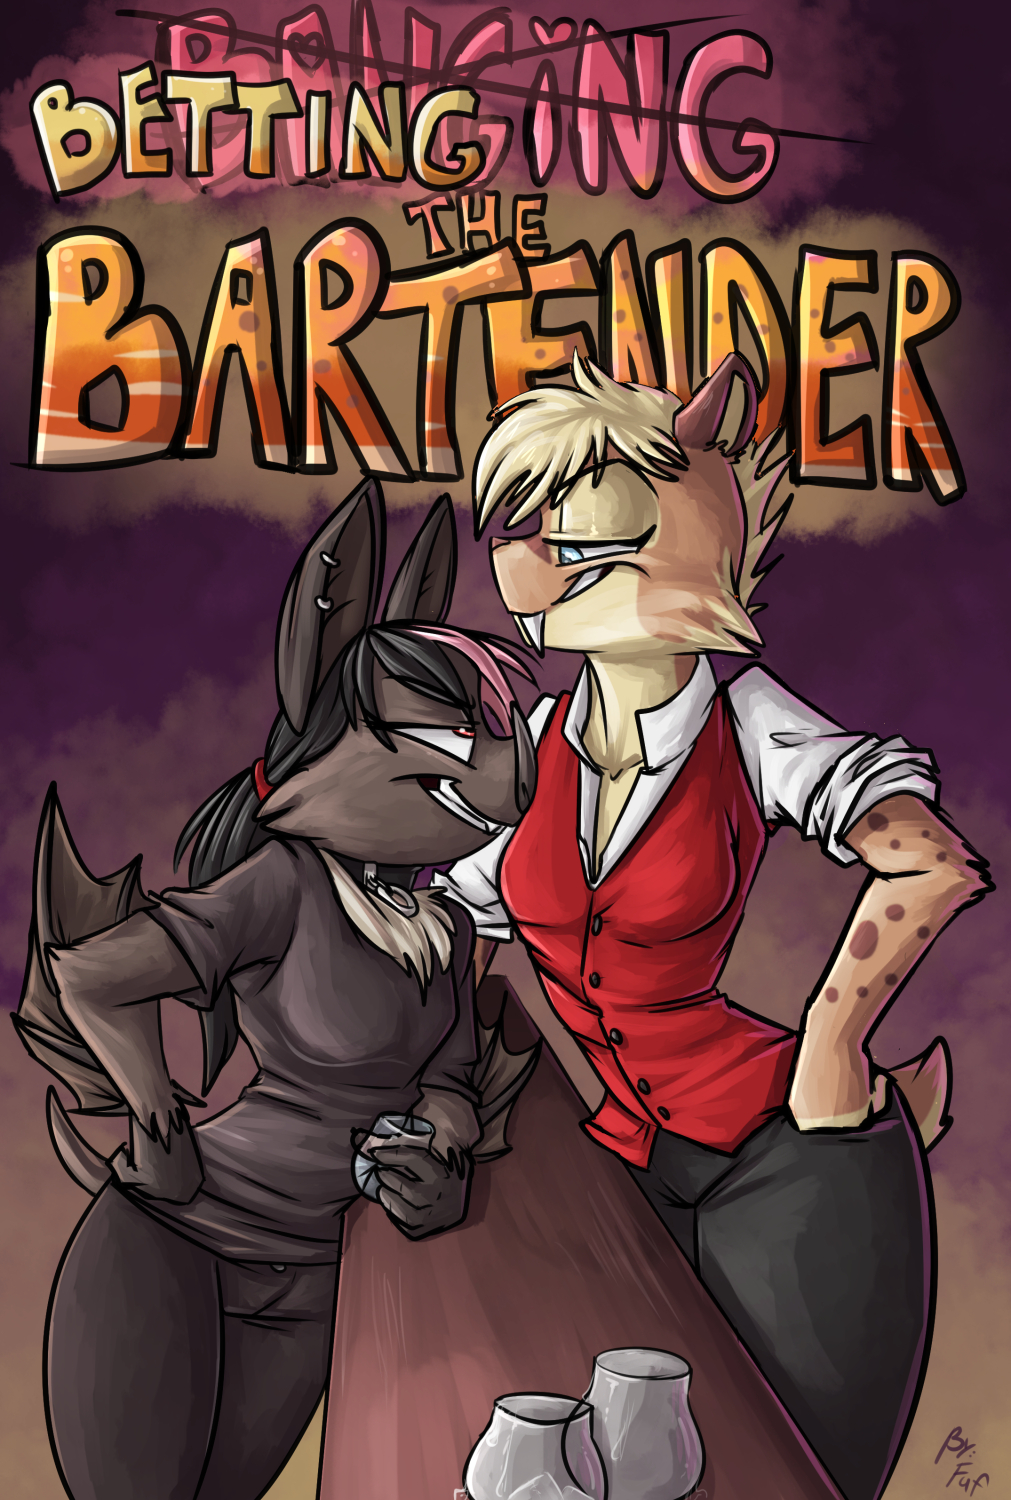 Betting the Bartender by Fuf Porn Comic